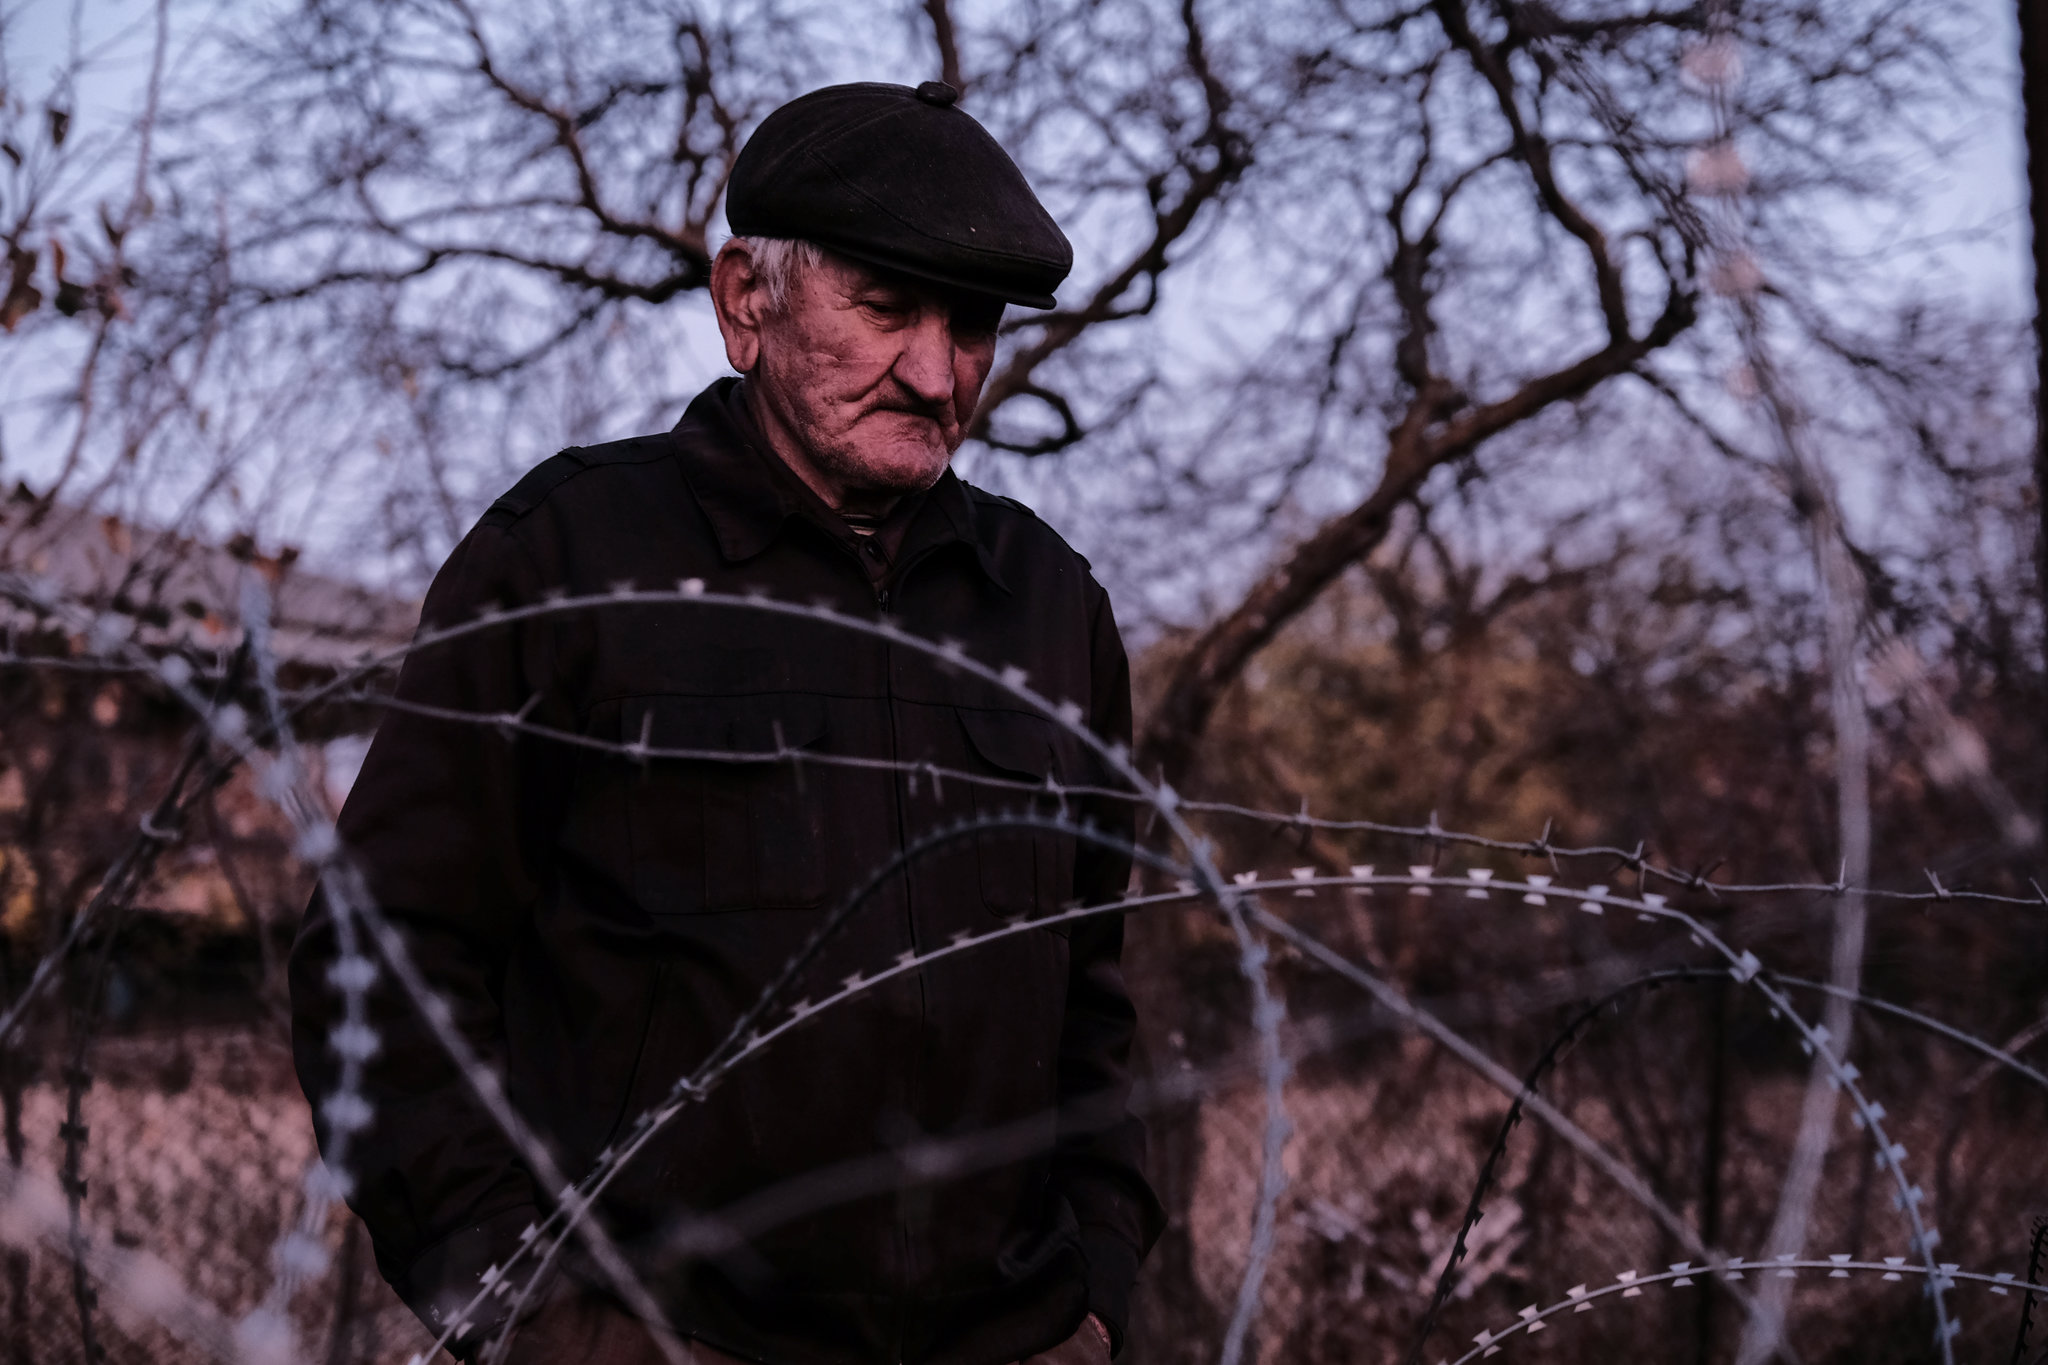  One day, Data Vanishvili found his house on occupied territory, where he lives now in poverty. He is not allowed to cross the fence and has no access to his pension. Village of Bobnevi, 2017. 